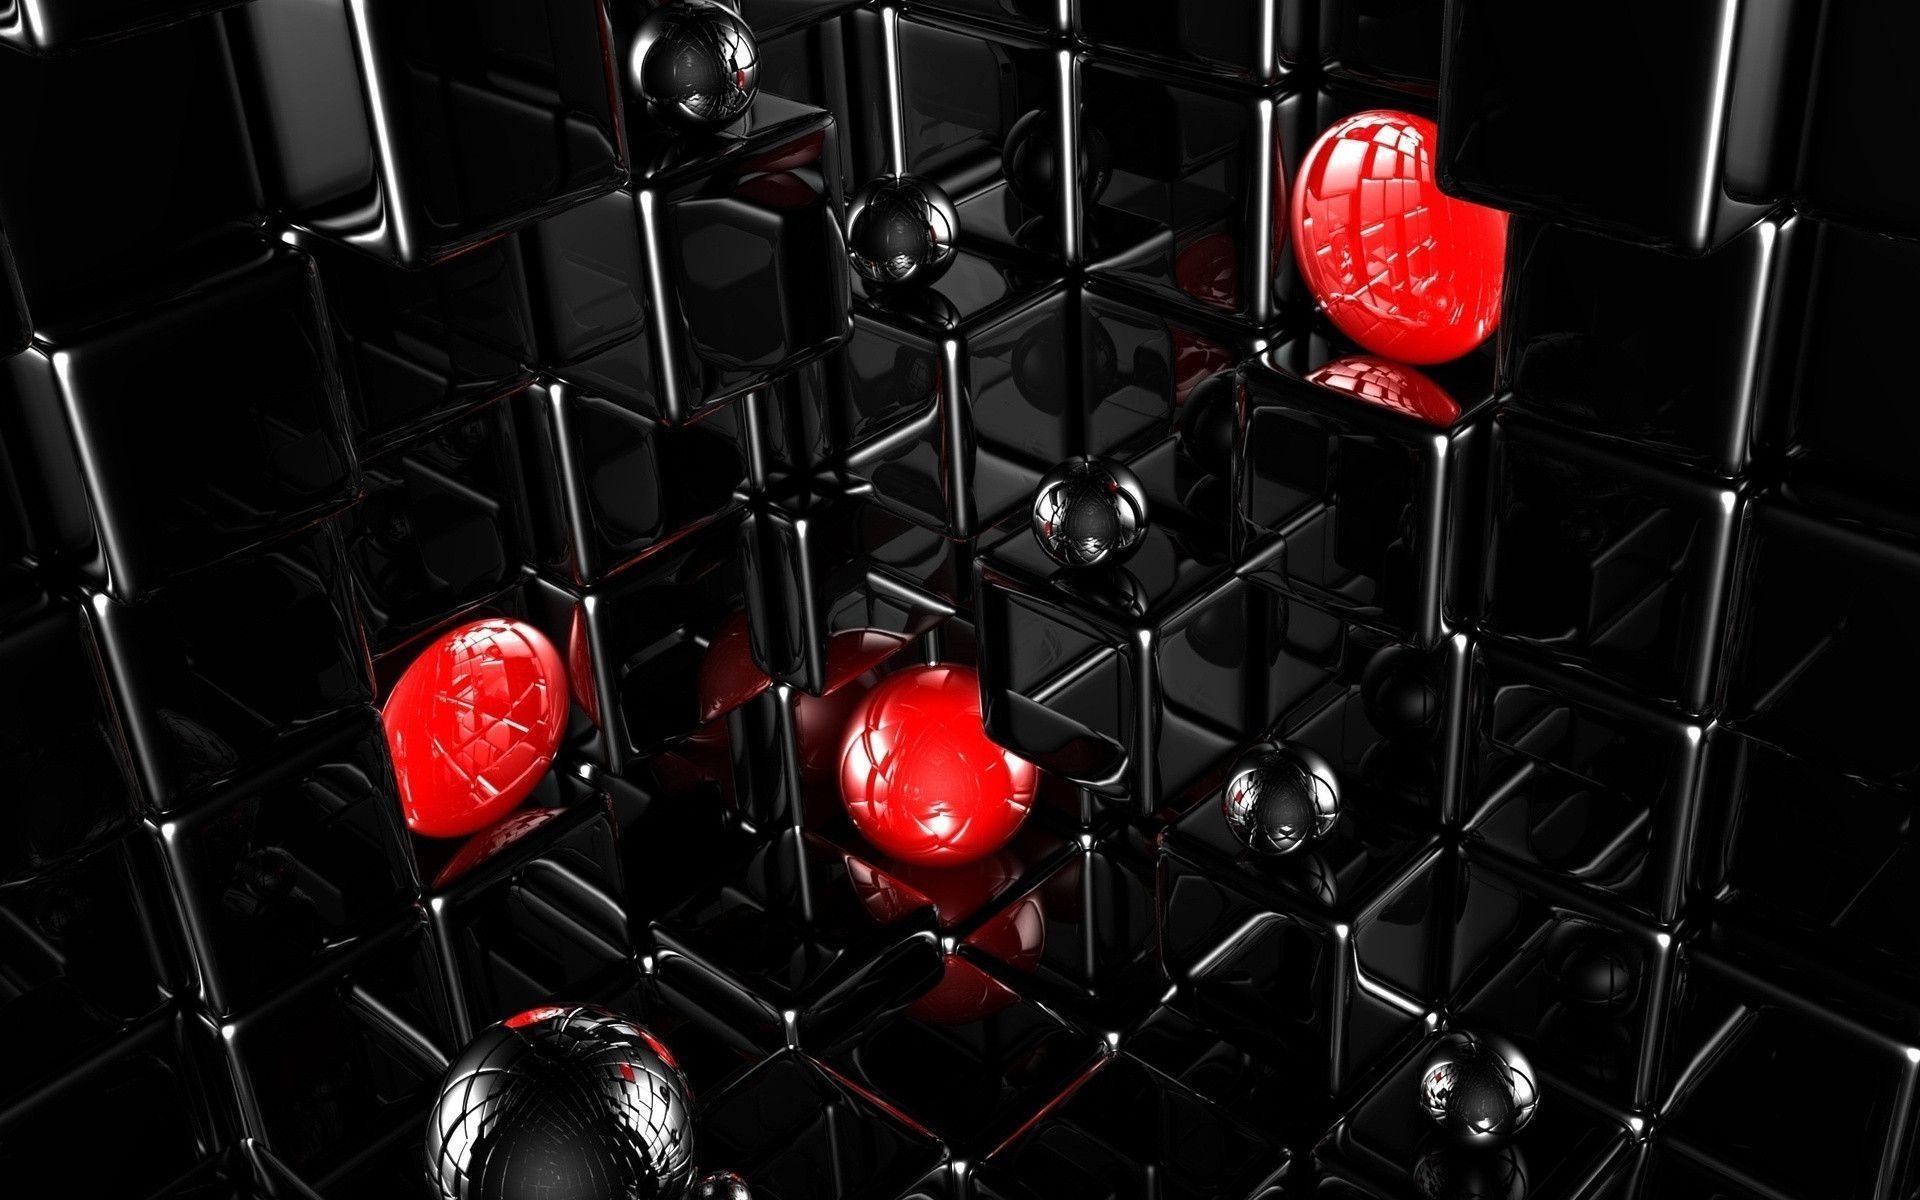 Art: HD Wallpaper Red Abstract Black Wallpaper With Some Pieces